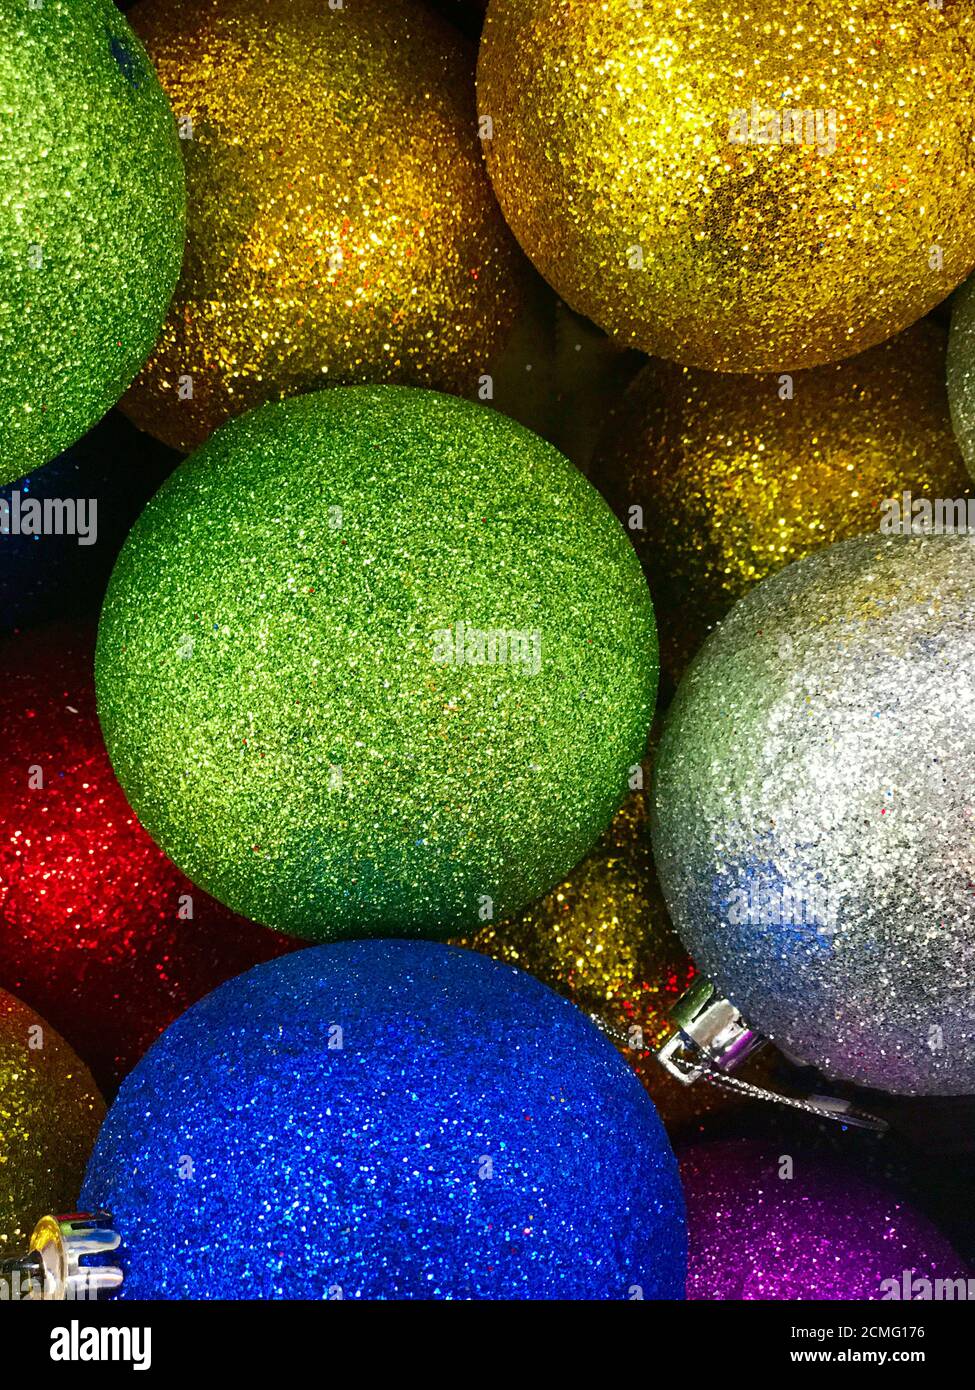 Shiny Christmas decorations in different colors Stock Photo - Alamy